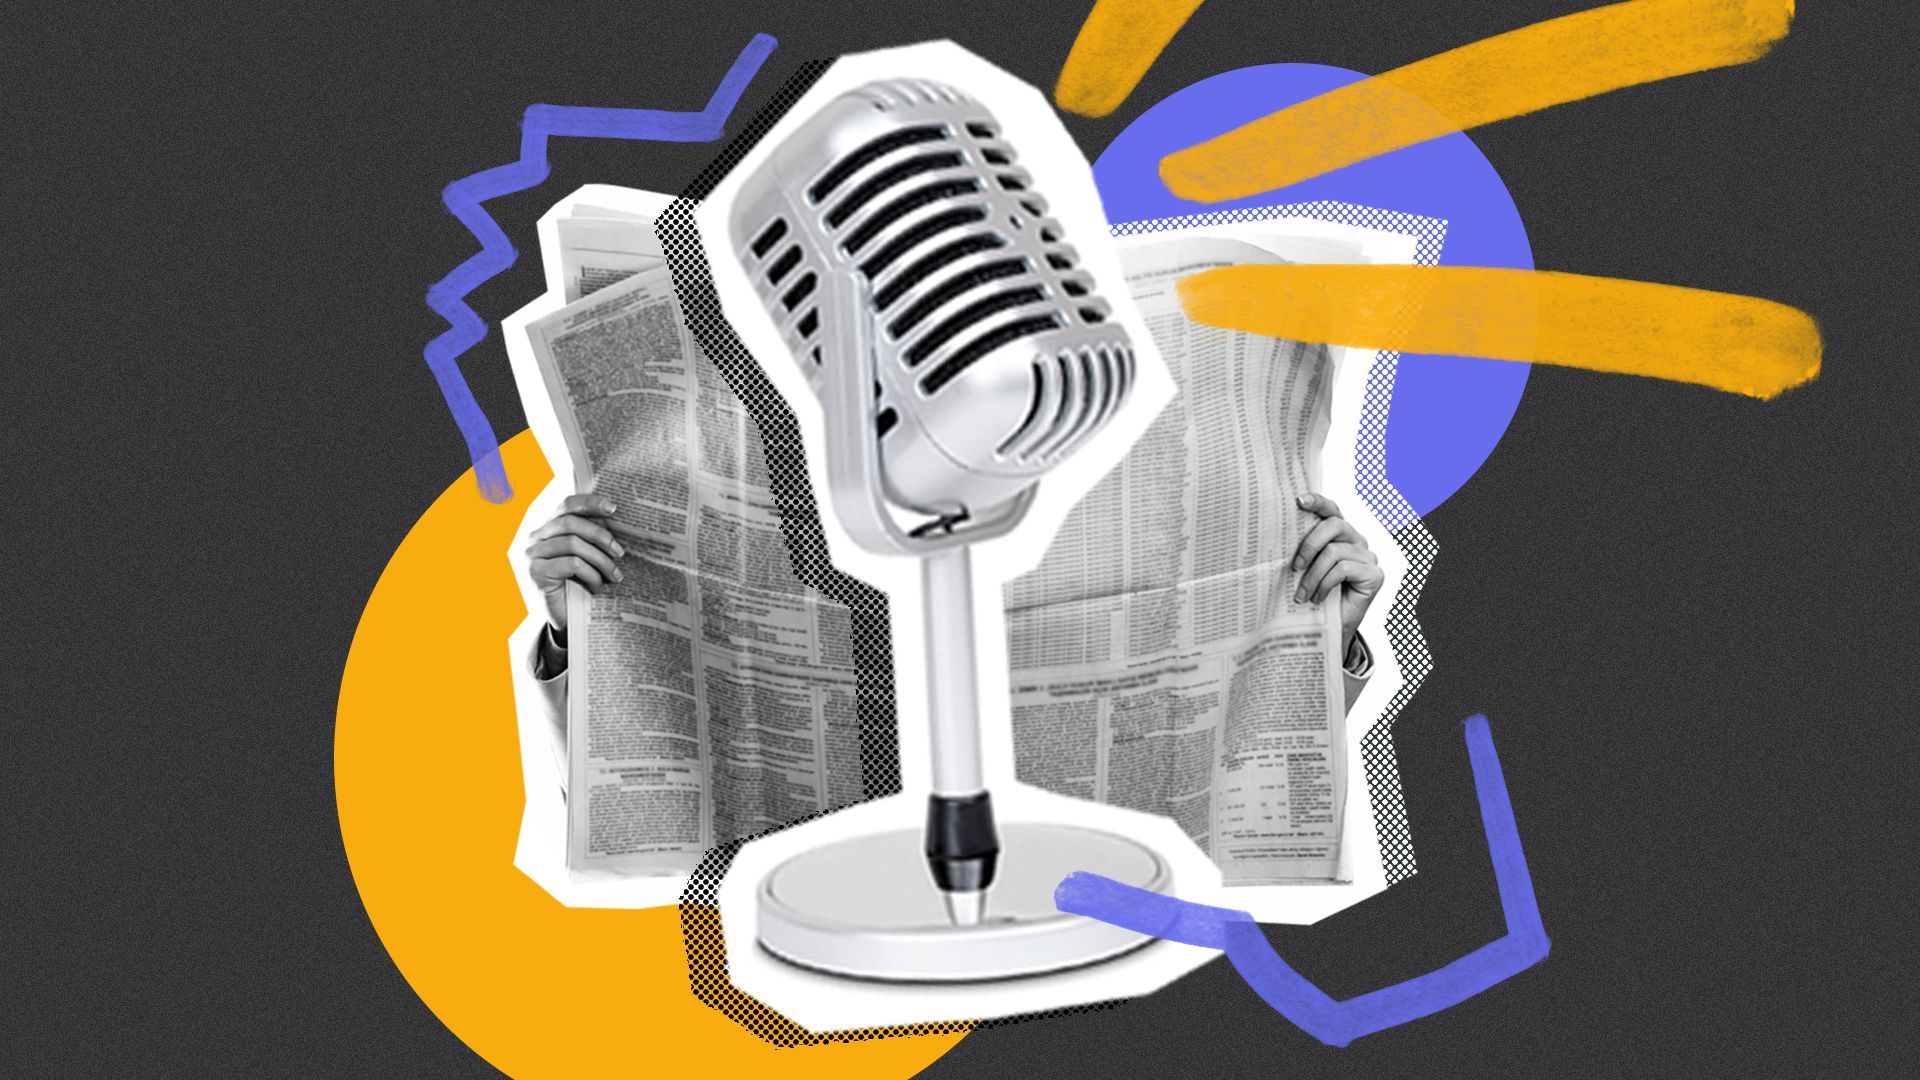 Illustrated collage of a person reading a newspaper and a microphone.